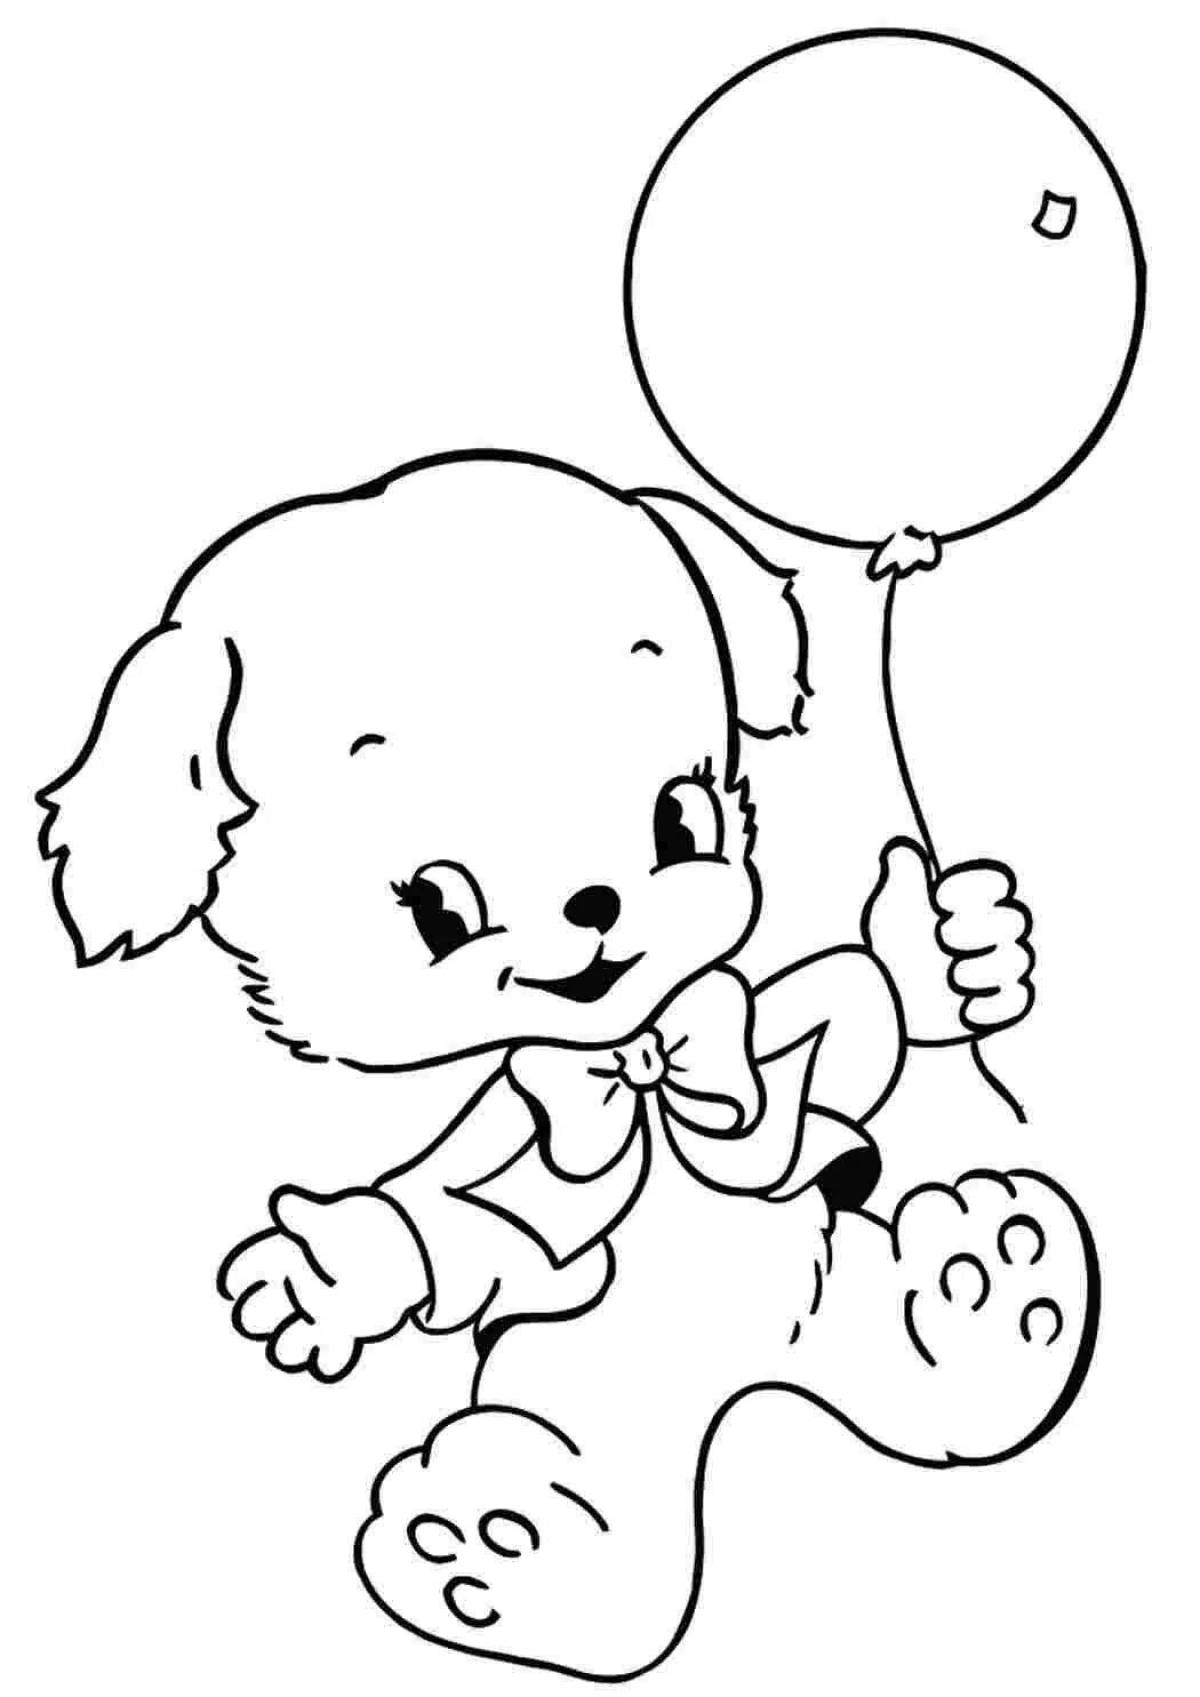 Fun coloring book for 1 year old girls